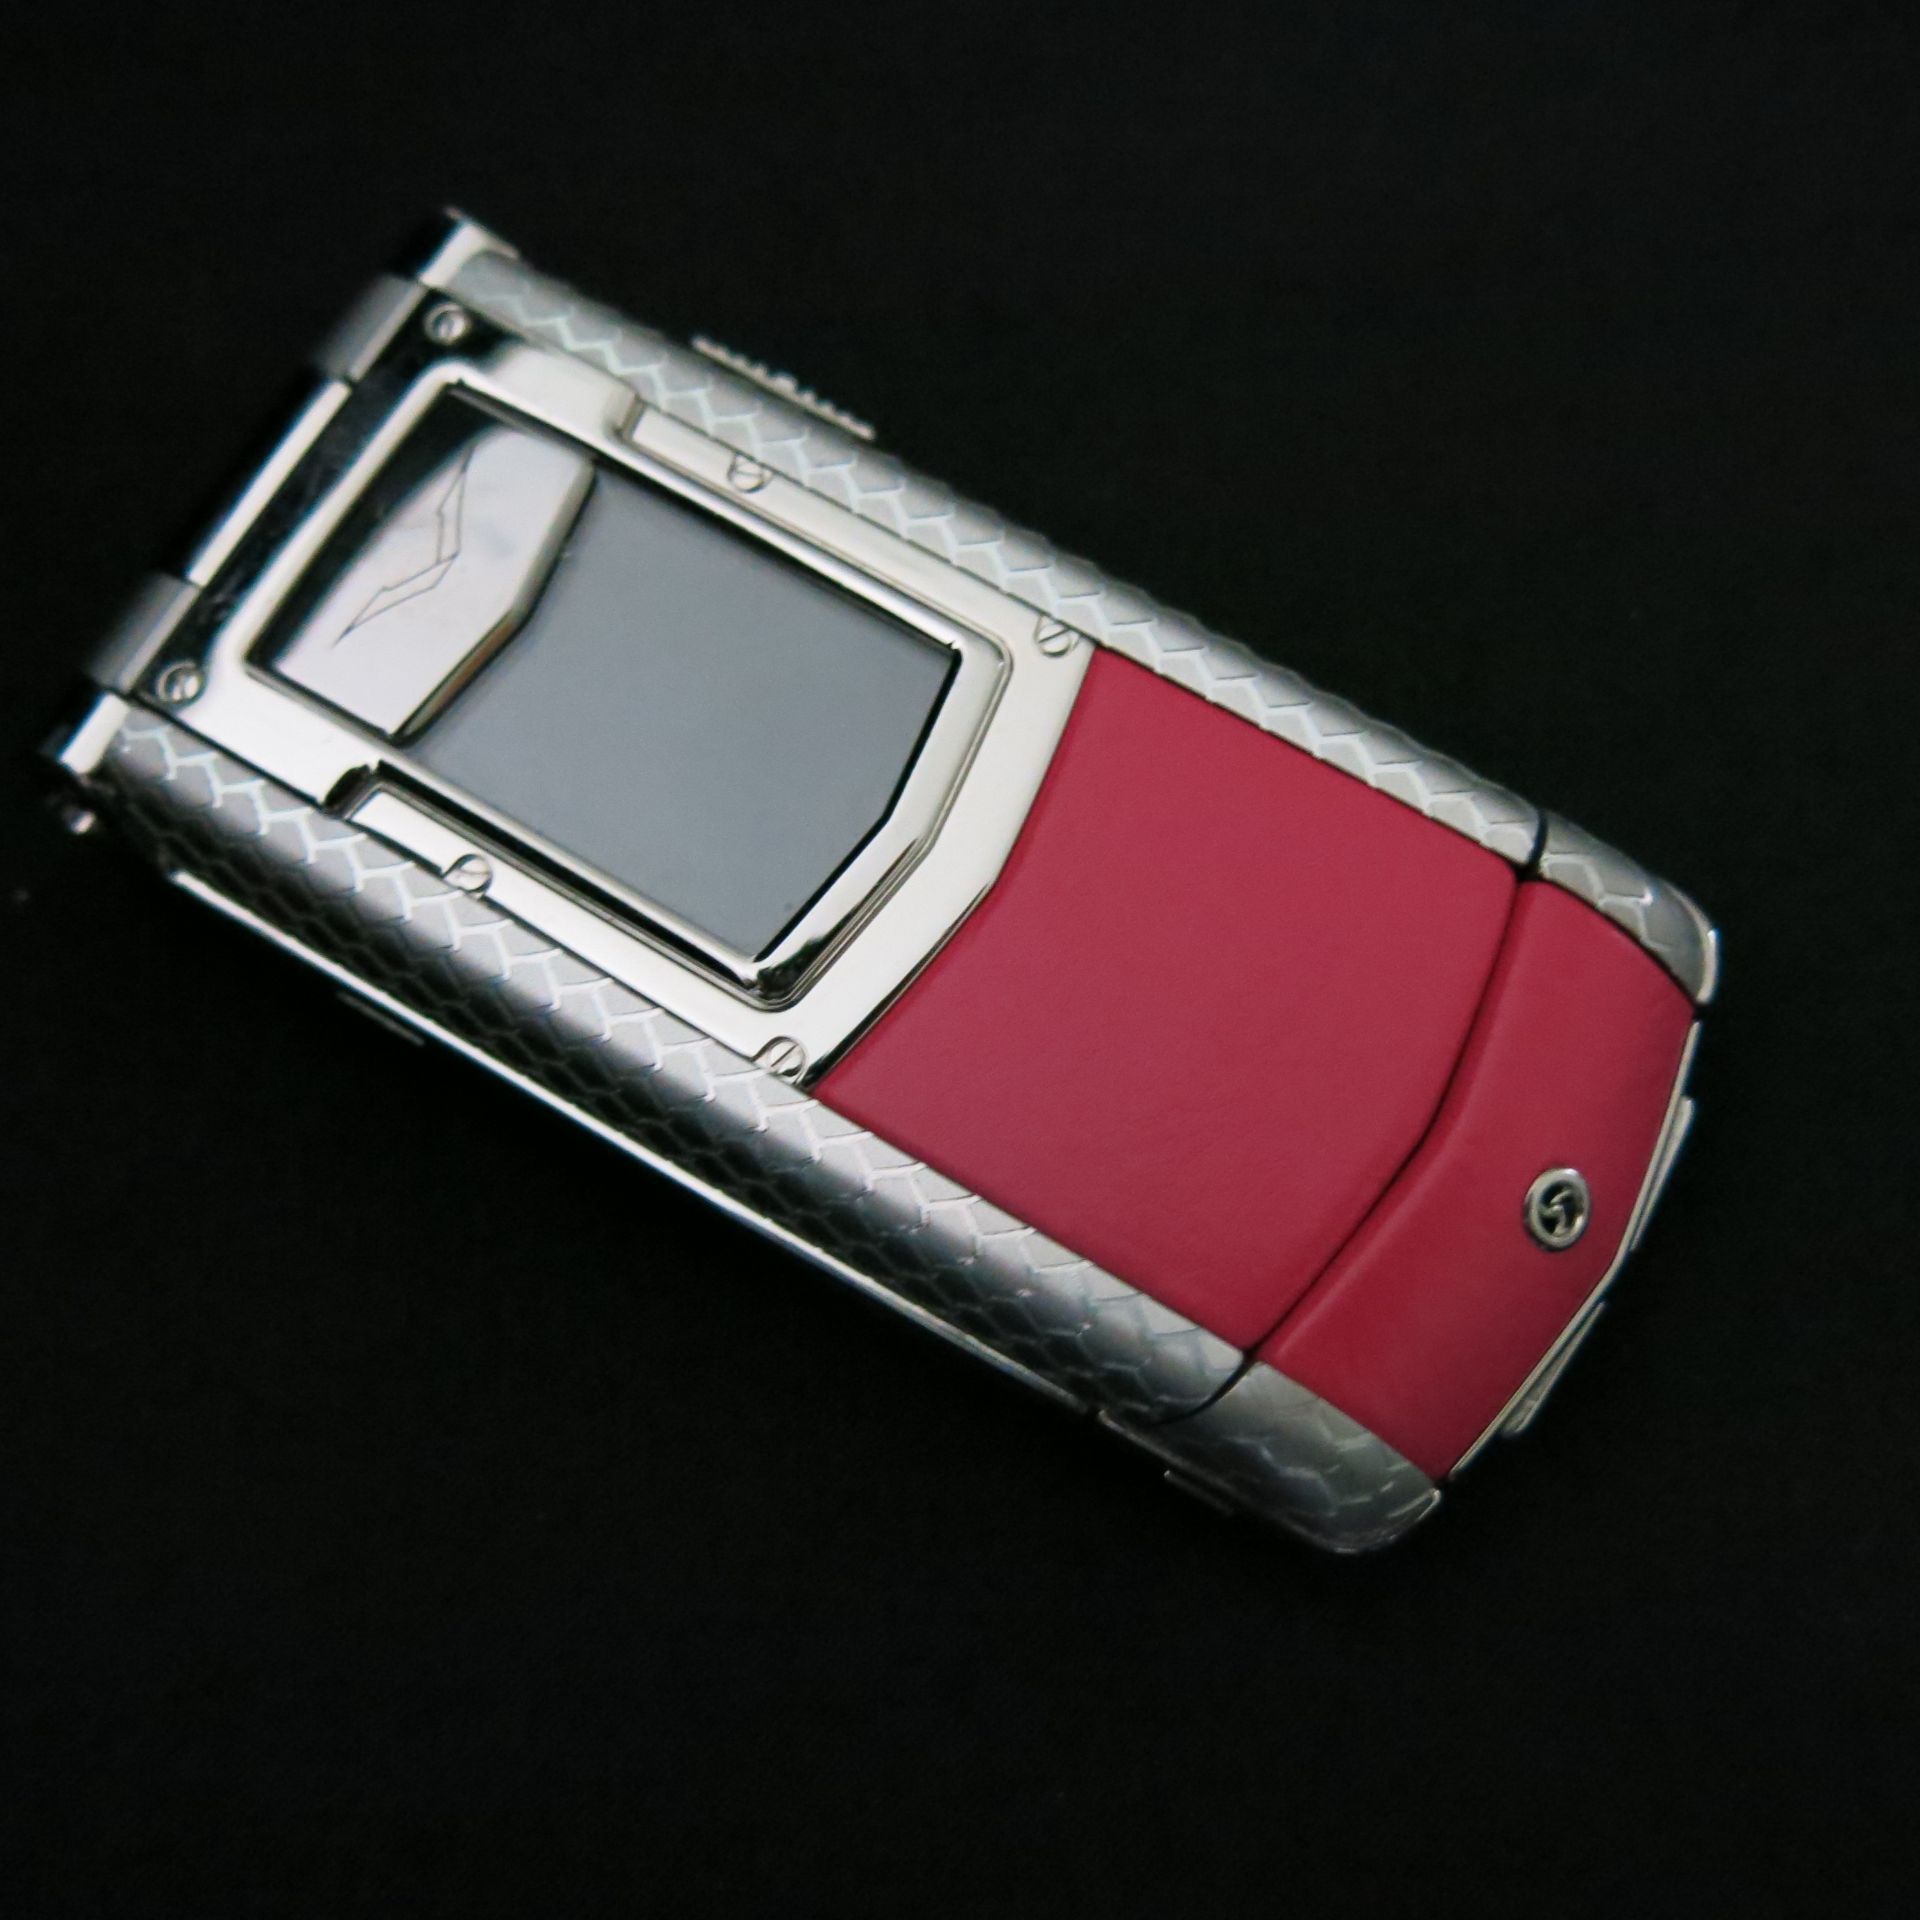 Entire Contents of the VERTU Museum Collection to Include: 105 Various Iconic Phones & Appearance - Image 60 of 106